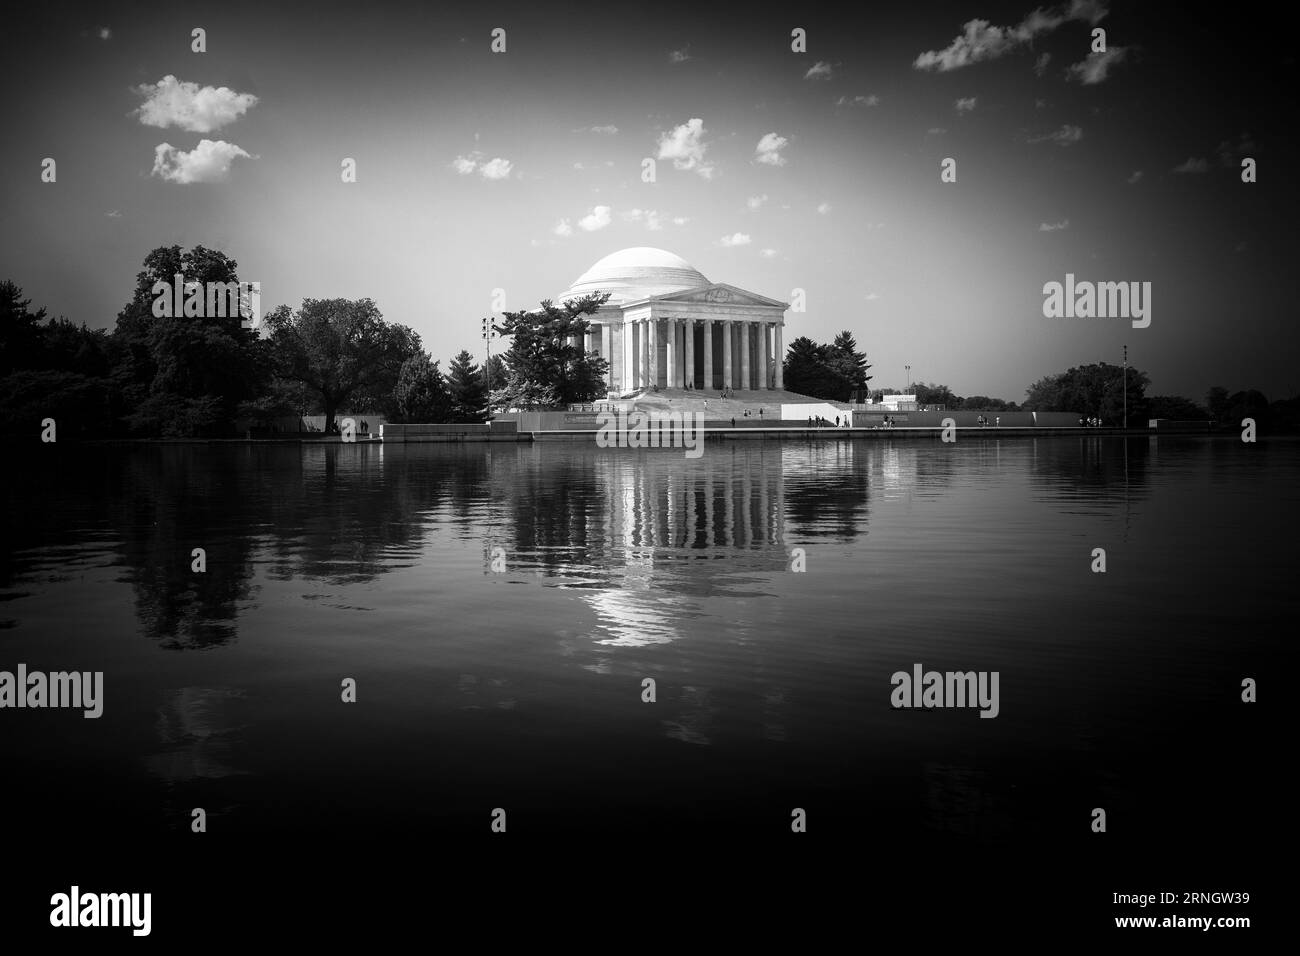 WASHINGTON DC, United States — The Jefferson Memorial stands as an iconic monument along the Tidal Basin, dedicated to the third President of the United States, Thomas Jefferson. It symbolizes the nation's respect and admiration for the principal author of the Declaration of Independence and his vision of democracy. Stock Photo